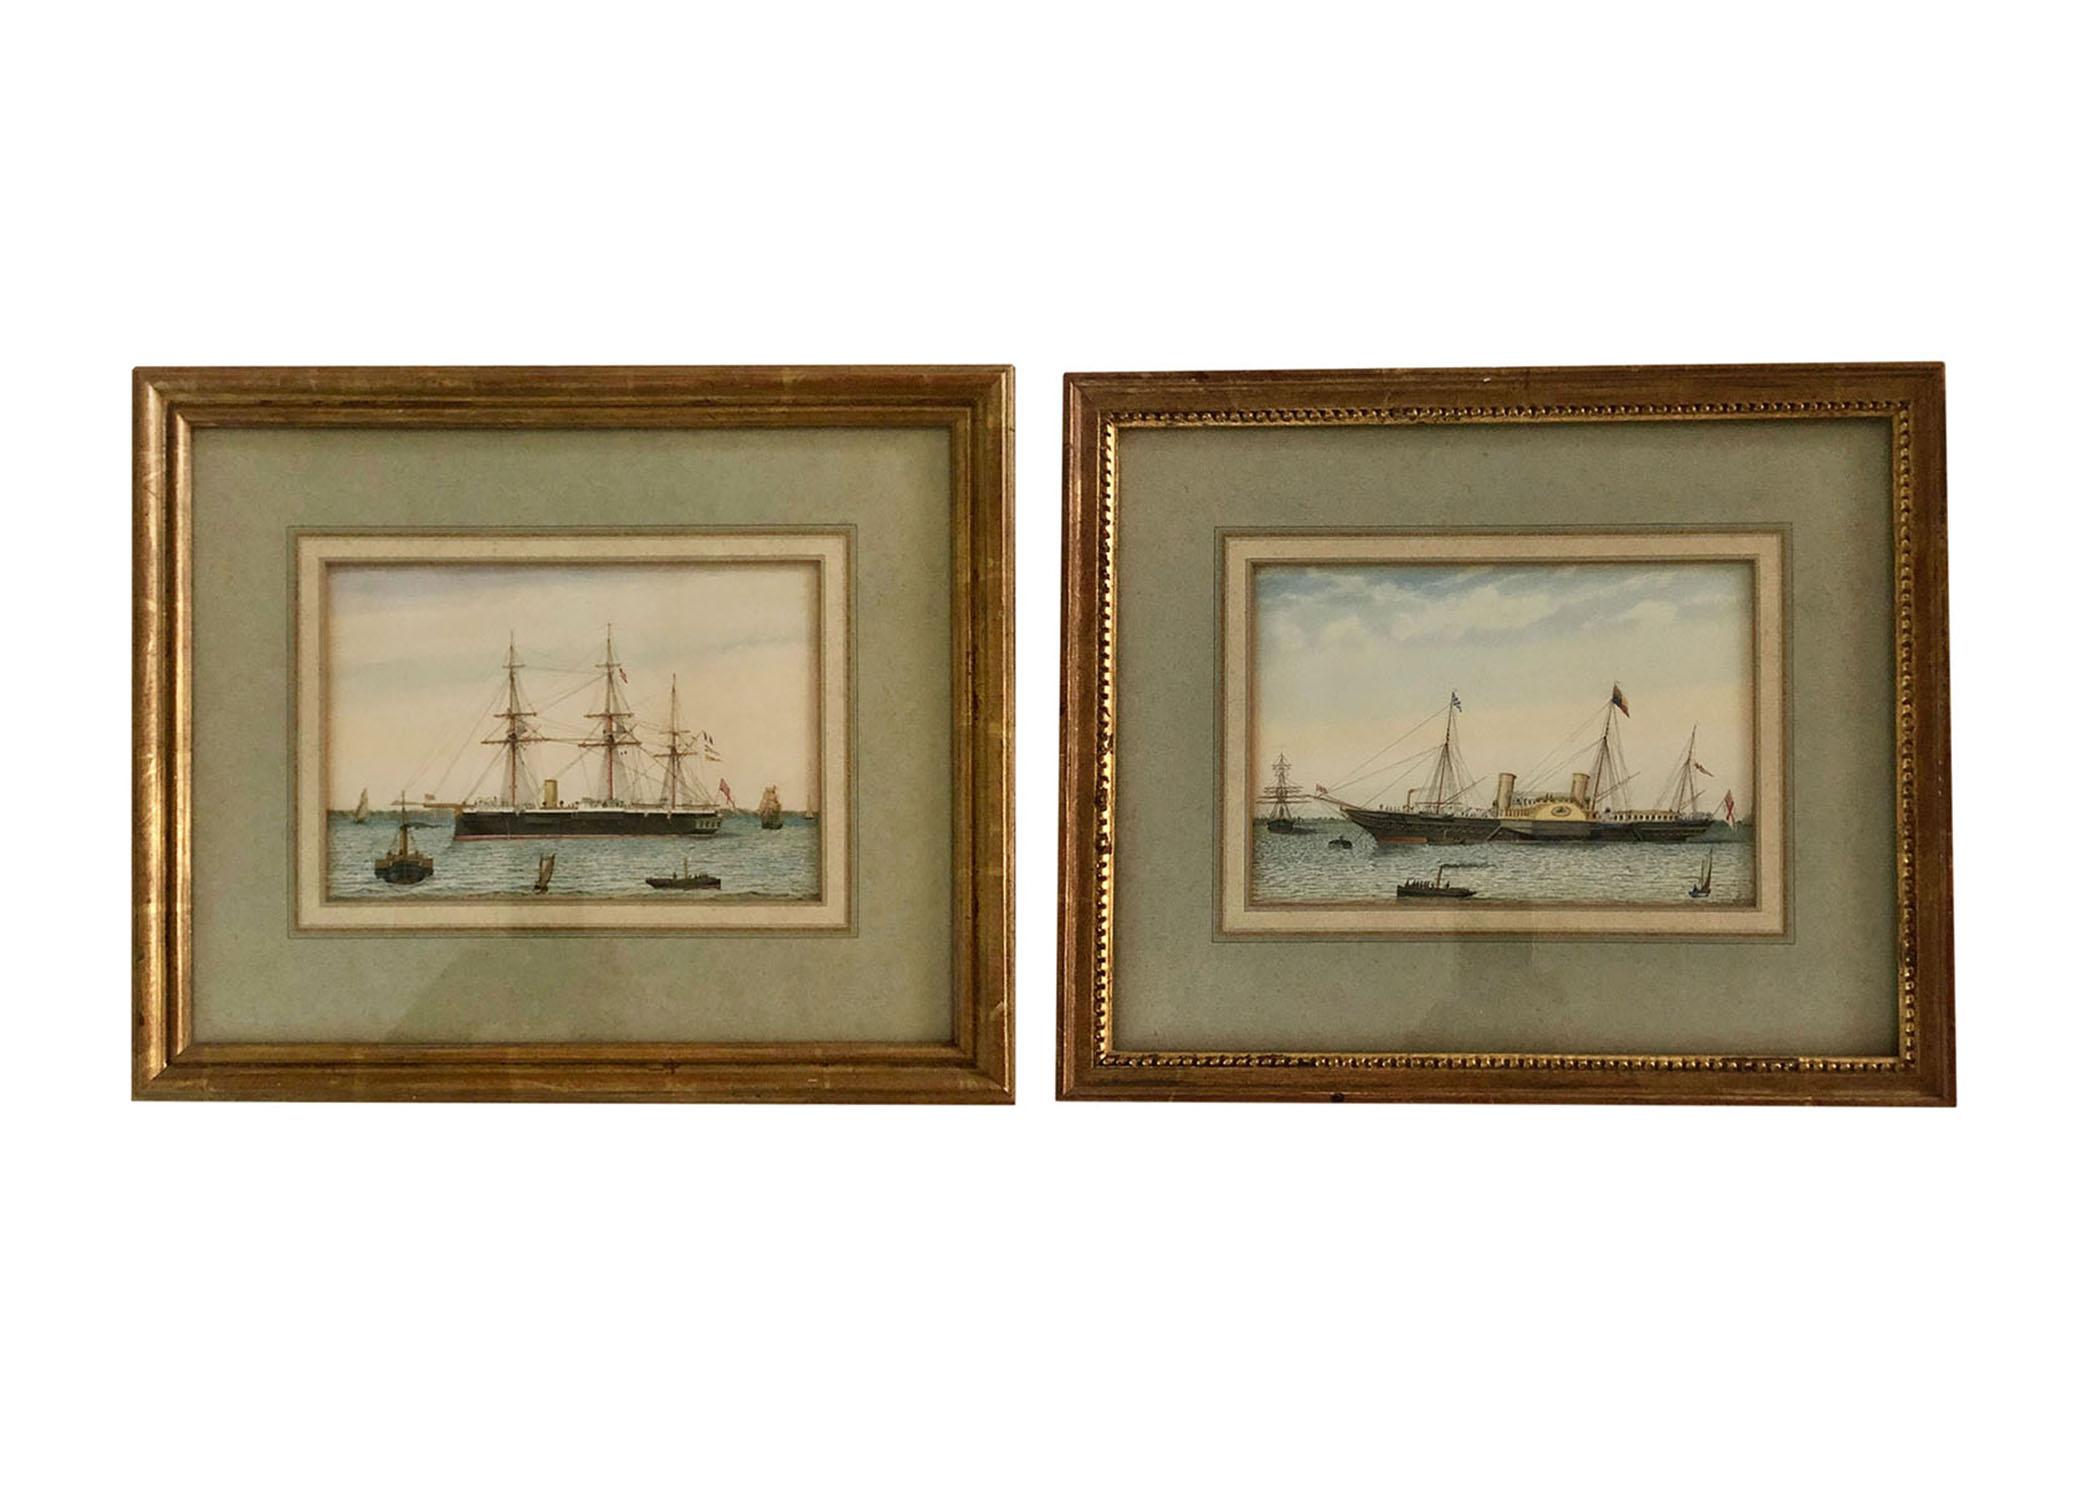 A pair of painting by British artist Fredrick Dove Ogilvie (1850-1921) noted British coastal and naval painter. Ships in the harbor in water gilded frames. Circa 1890s. Size of frames 18